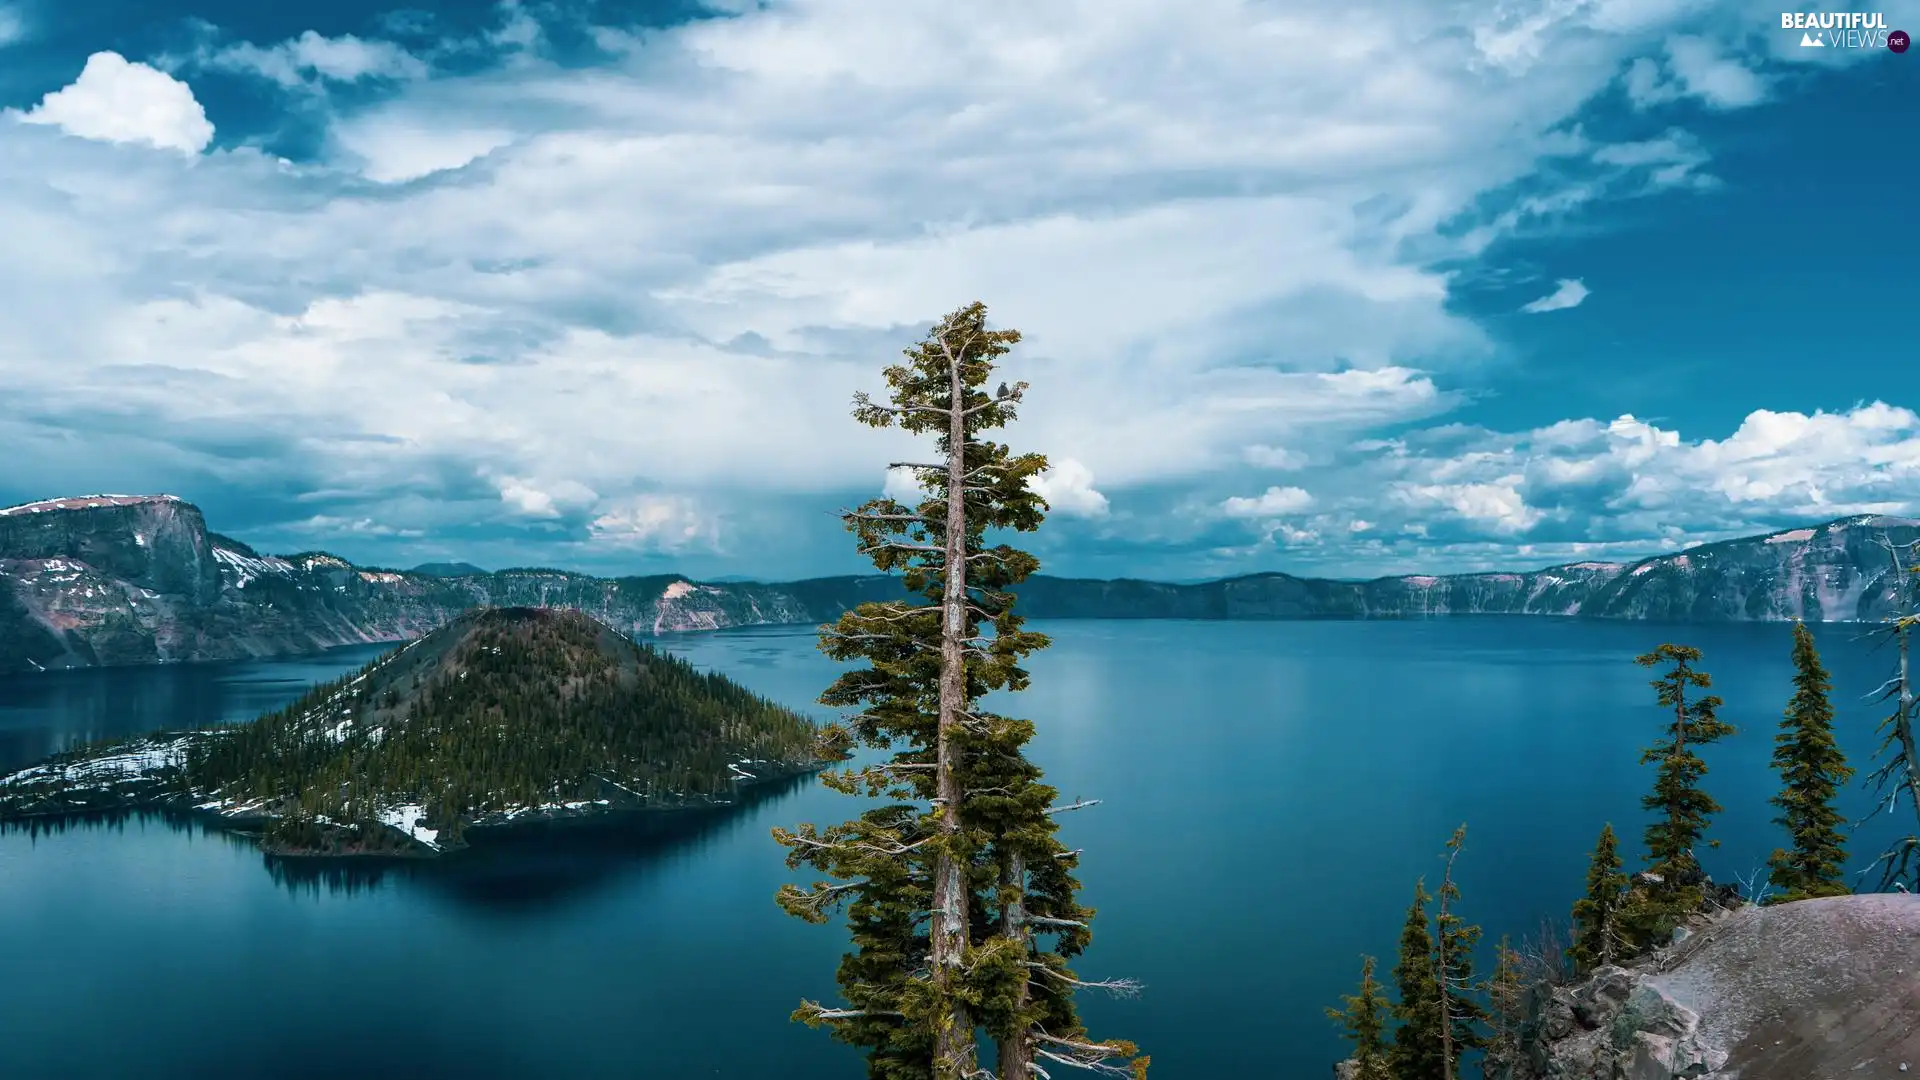 Crater Lake, Crater Lake National Park, Island of Wizard, Mountains, Oregon, The United States, viewes, clouds, trees